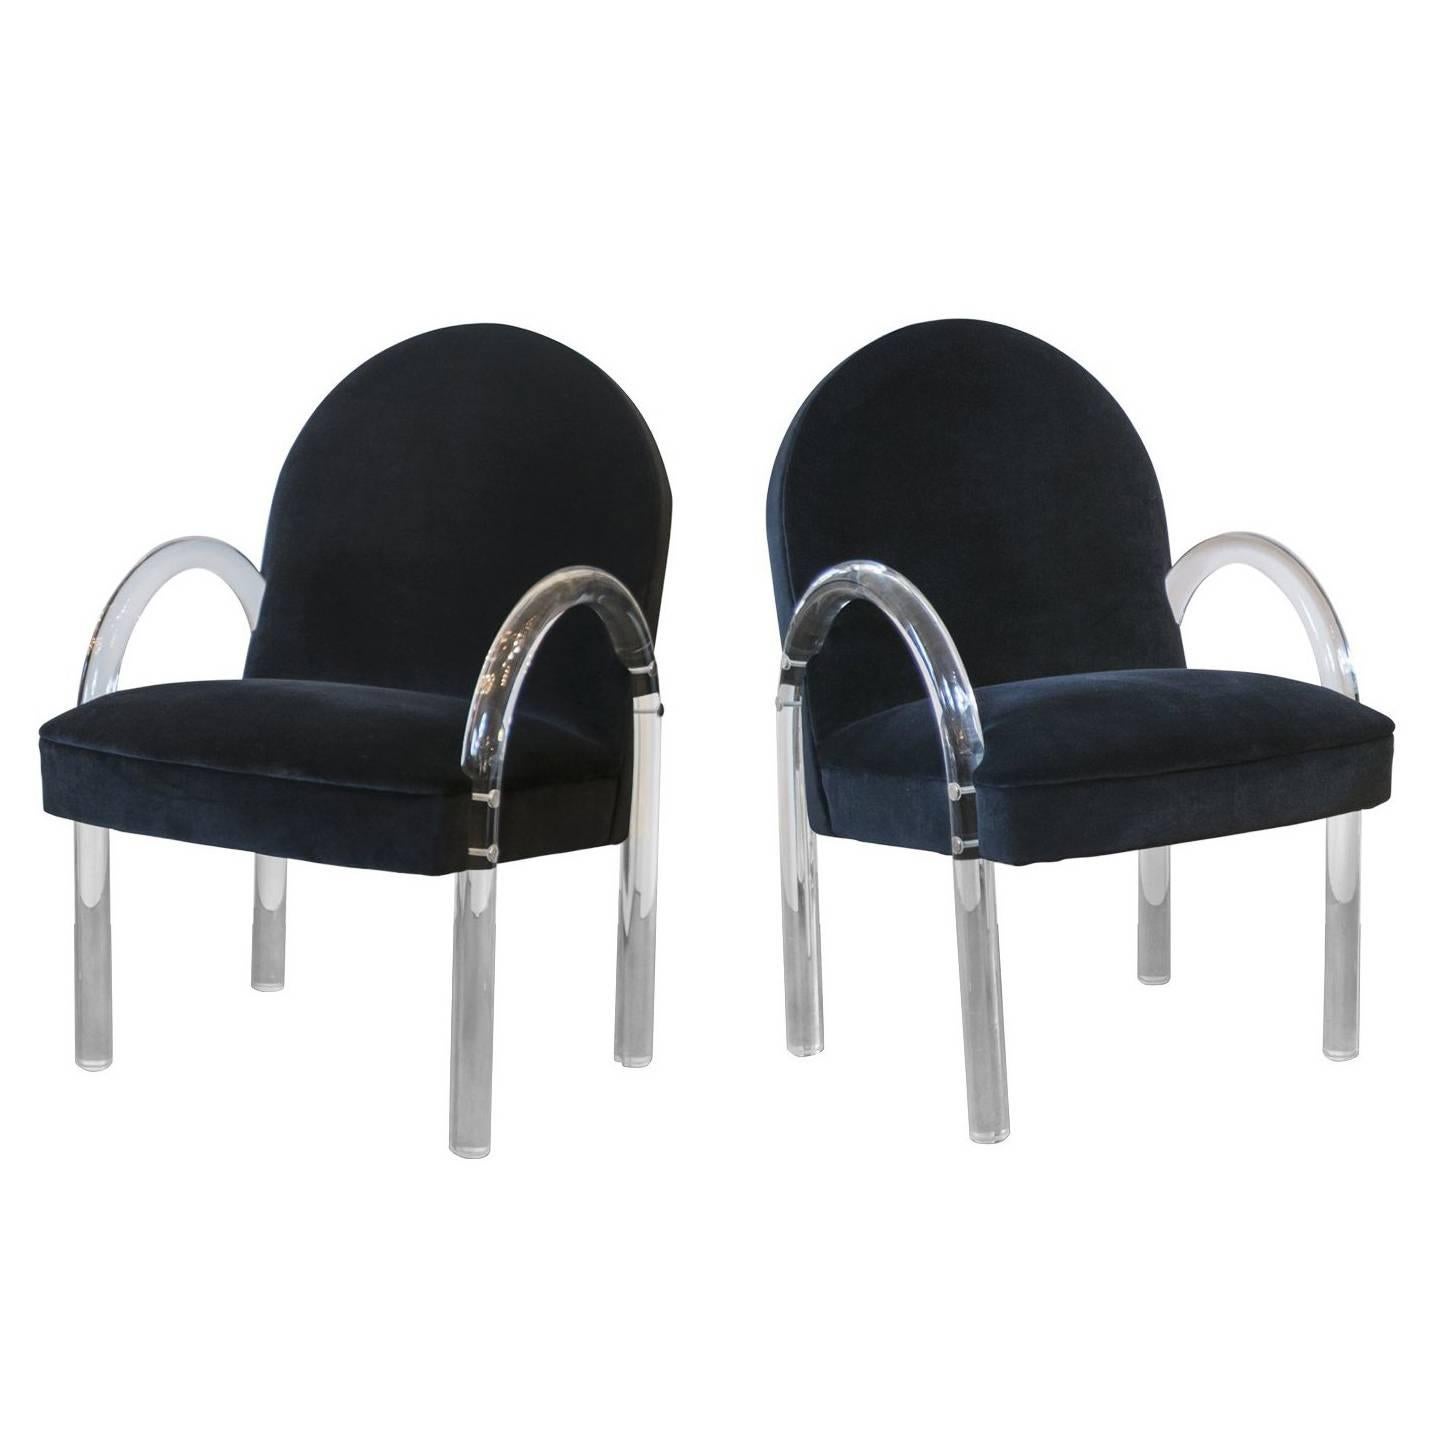 Pair of Pace Lucite Arm/Dining Chairs in Black Velvet